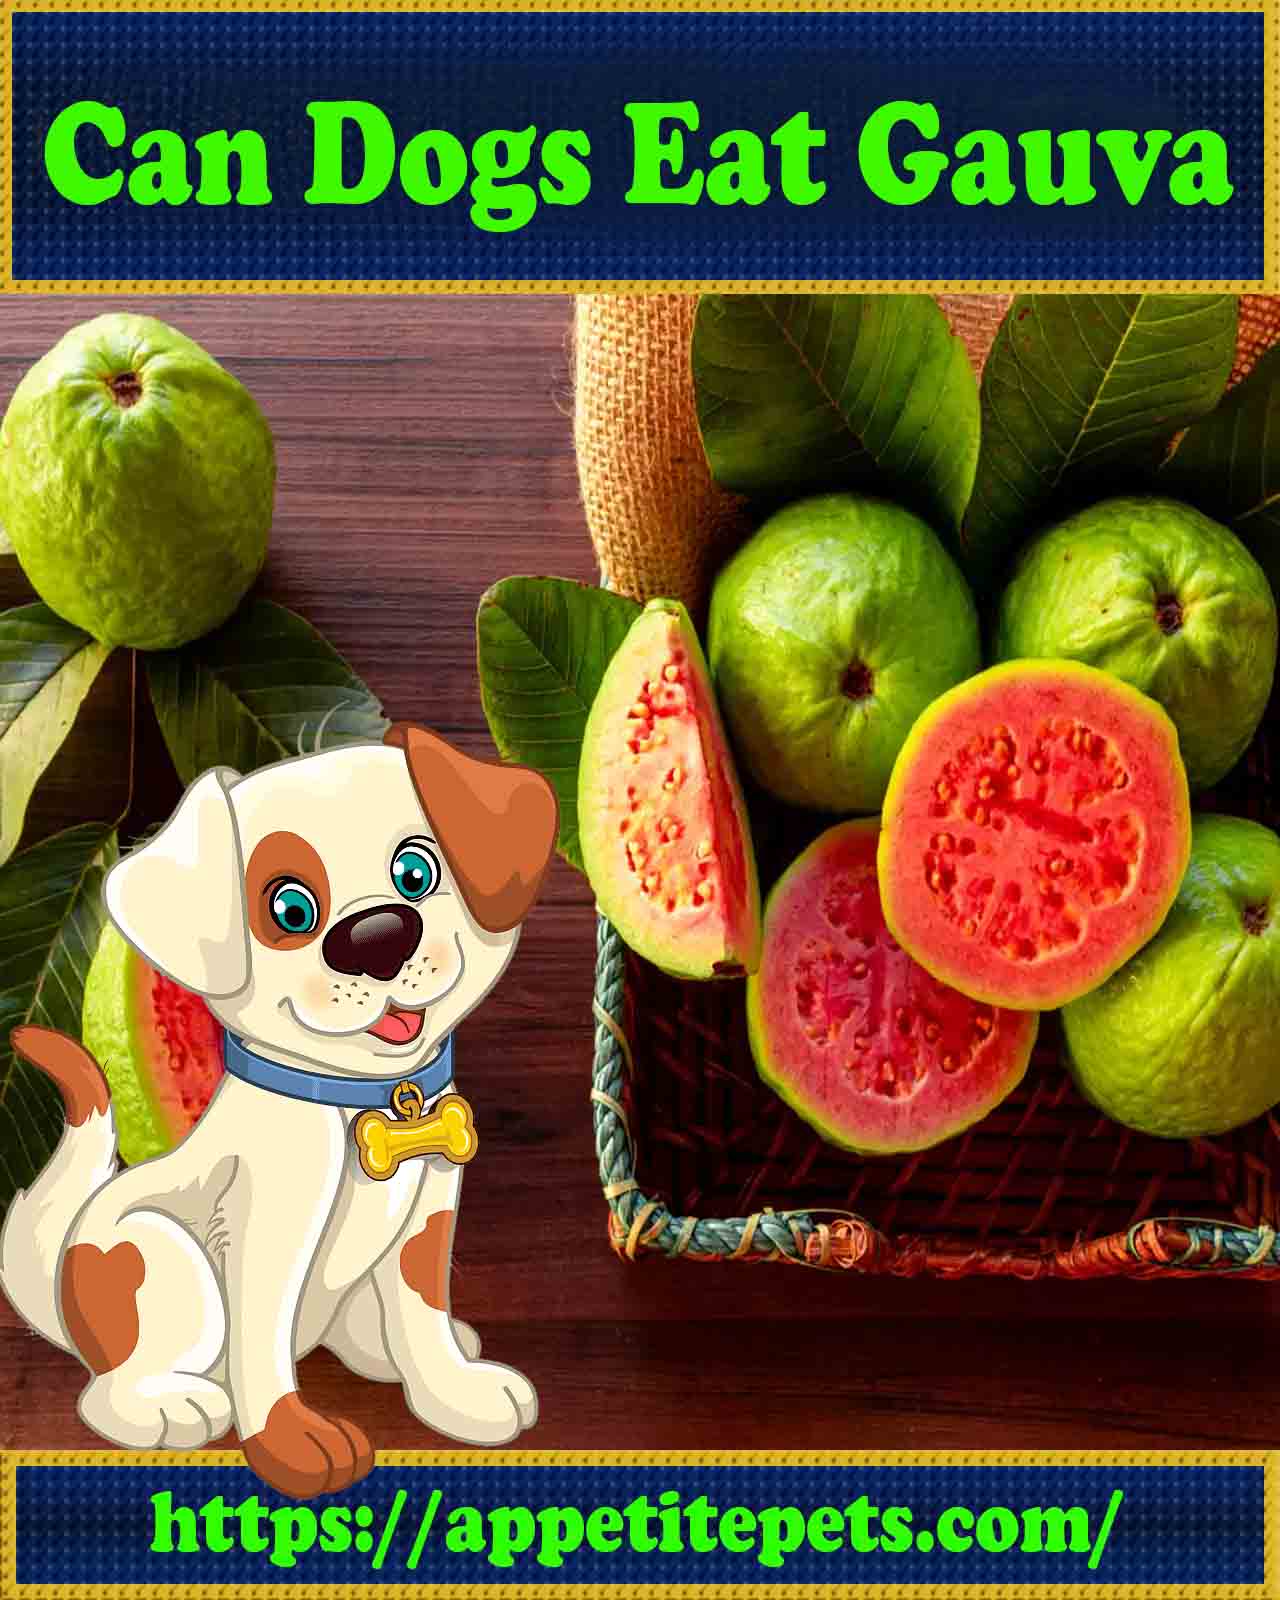 Can Dogs Eat Guava (Best Answers)